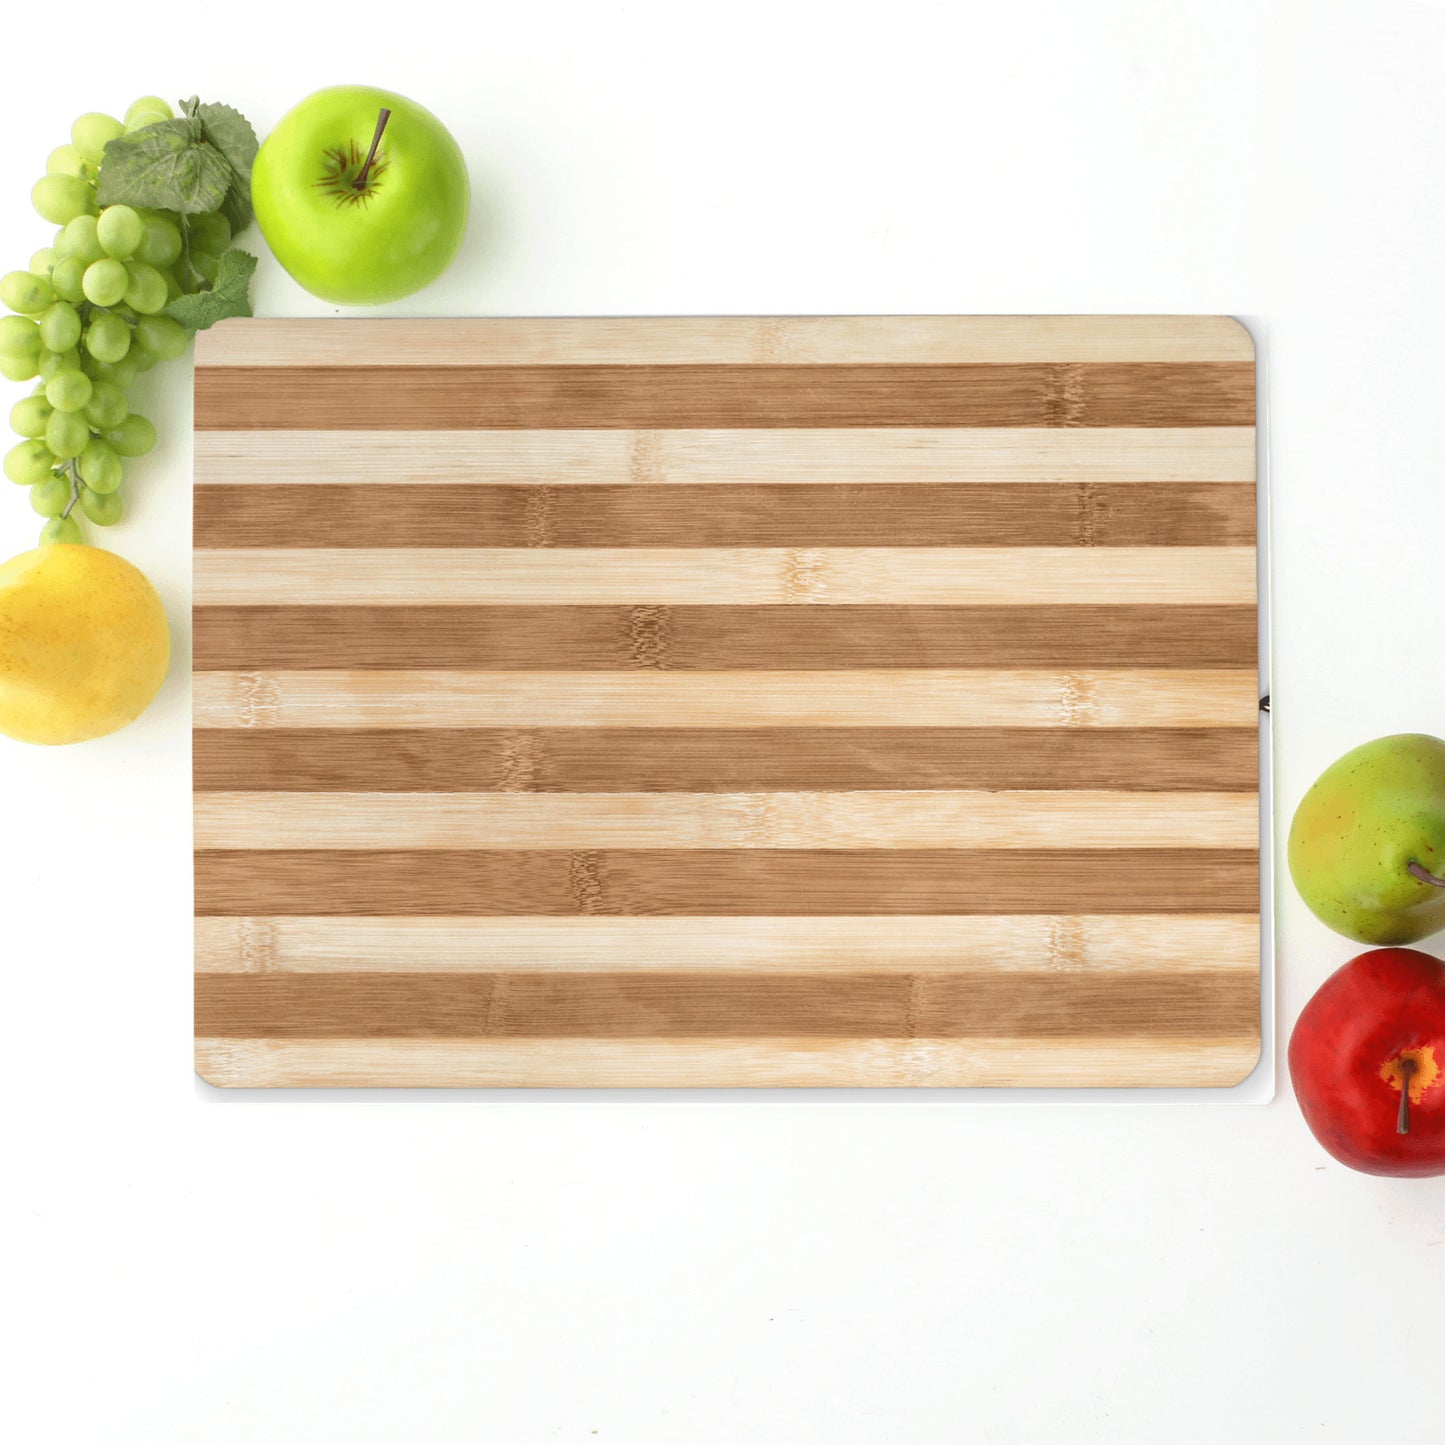 Two toned wooden cutting board image on a glass cutting board trick everyone with this great gift idea